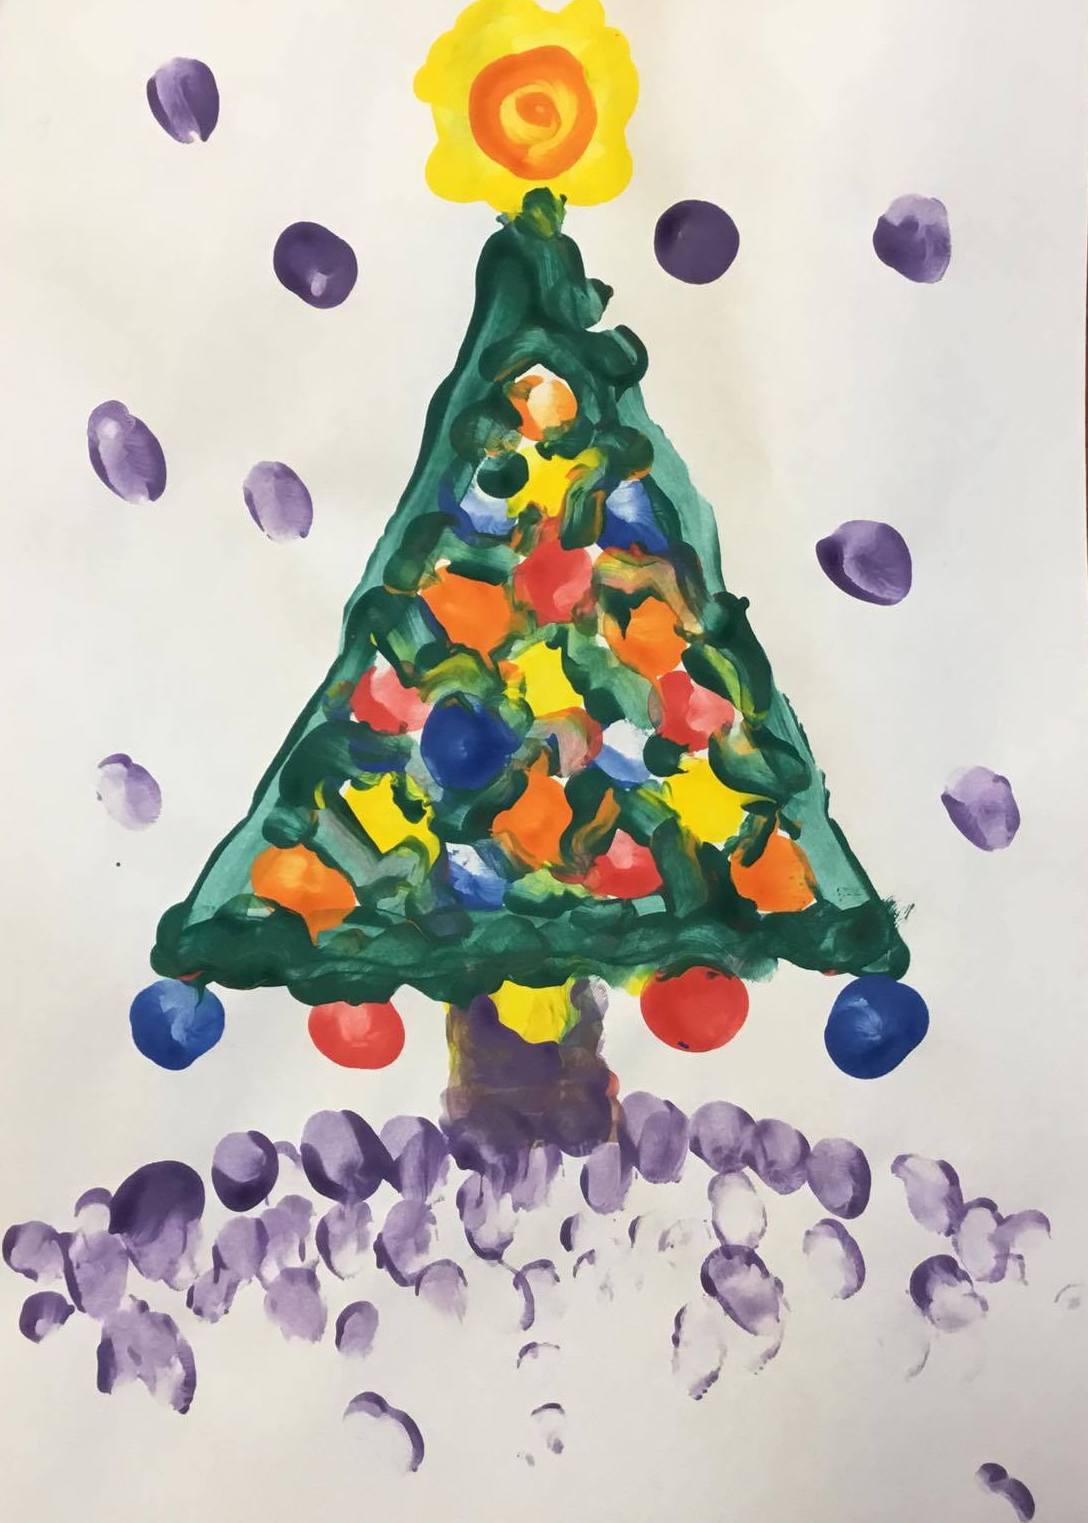 3D Drawings: pupils of the ‘Child with Future’ kindergarten took part in the toys’ creation for the Christmas tree near the President’s Office